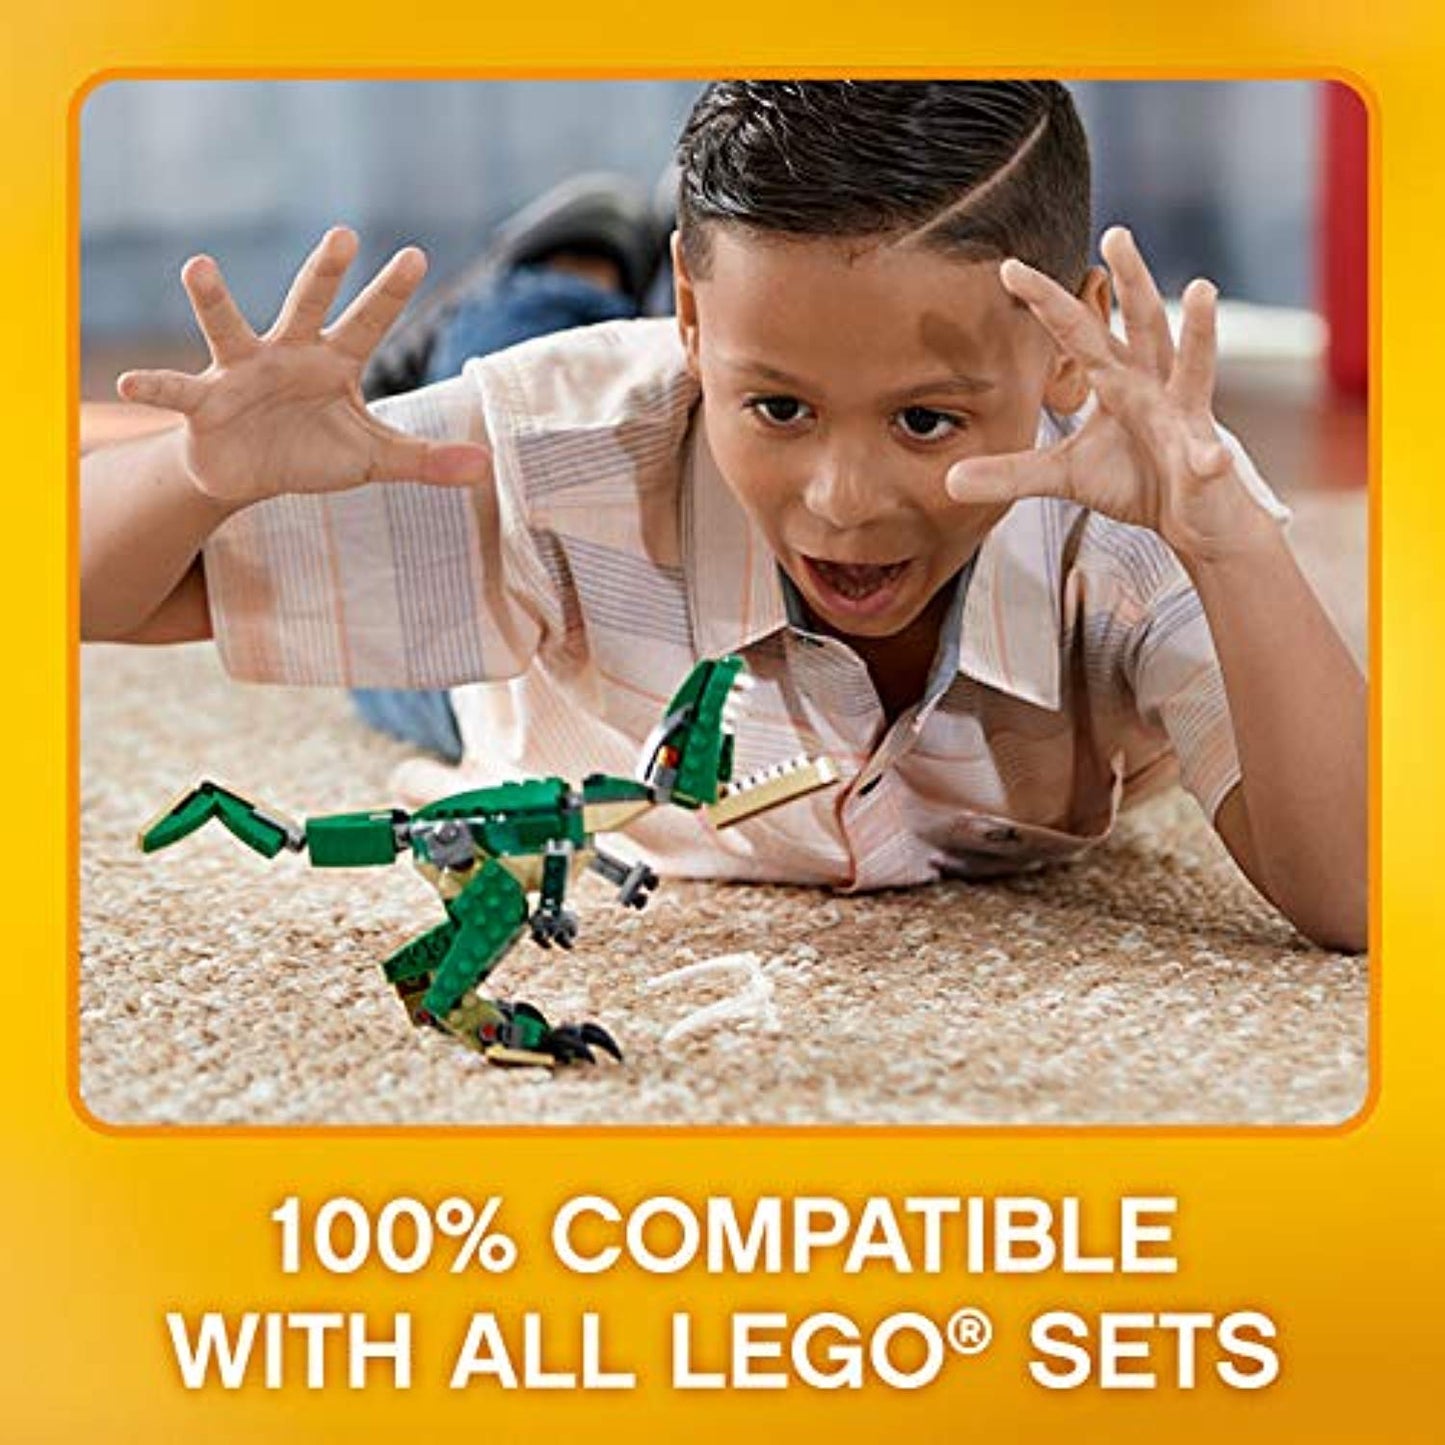 LEGO 31058 Creator Mighty Dinosaurs Toy, 3 in 1 Model, Triceratops and Pterodactyl Dinosaur Figures, Modular Building System - Offer Games